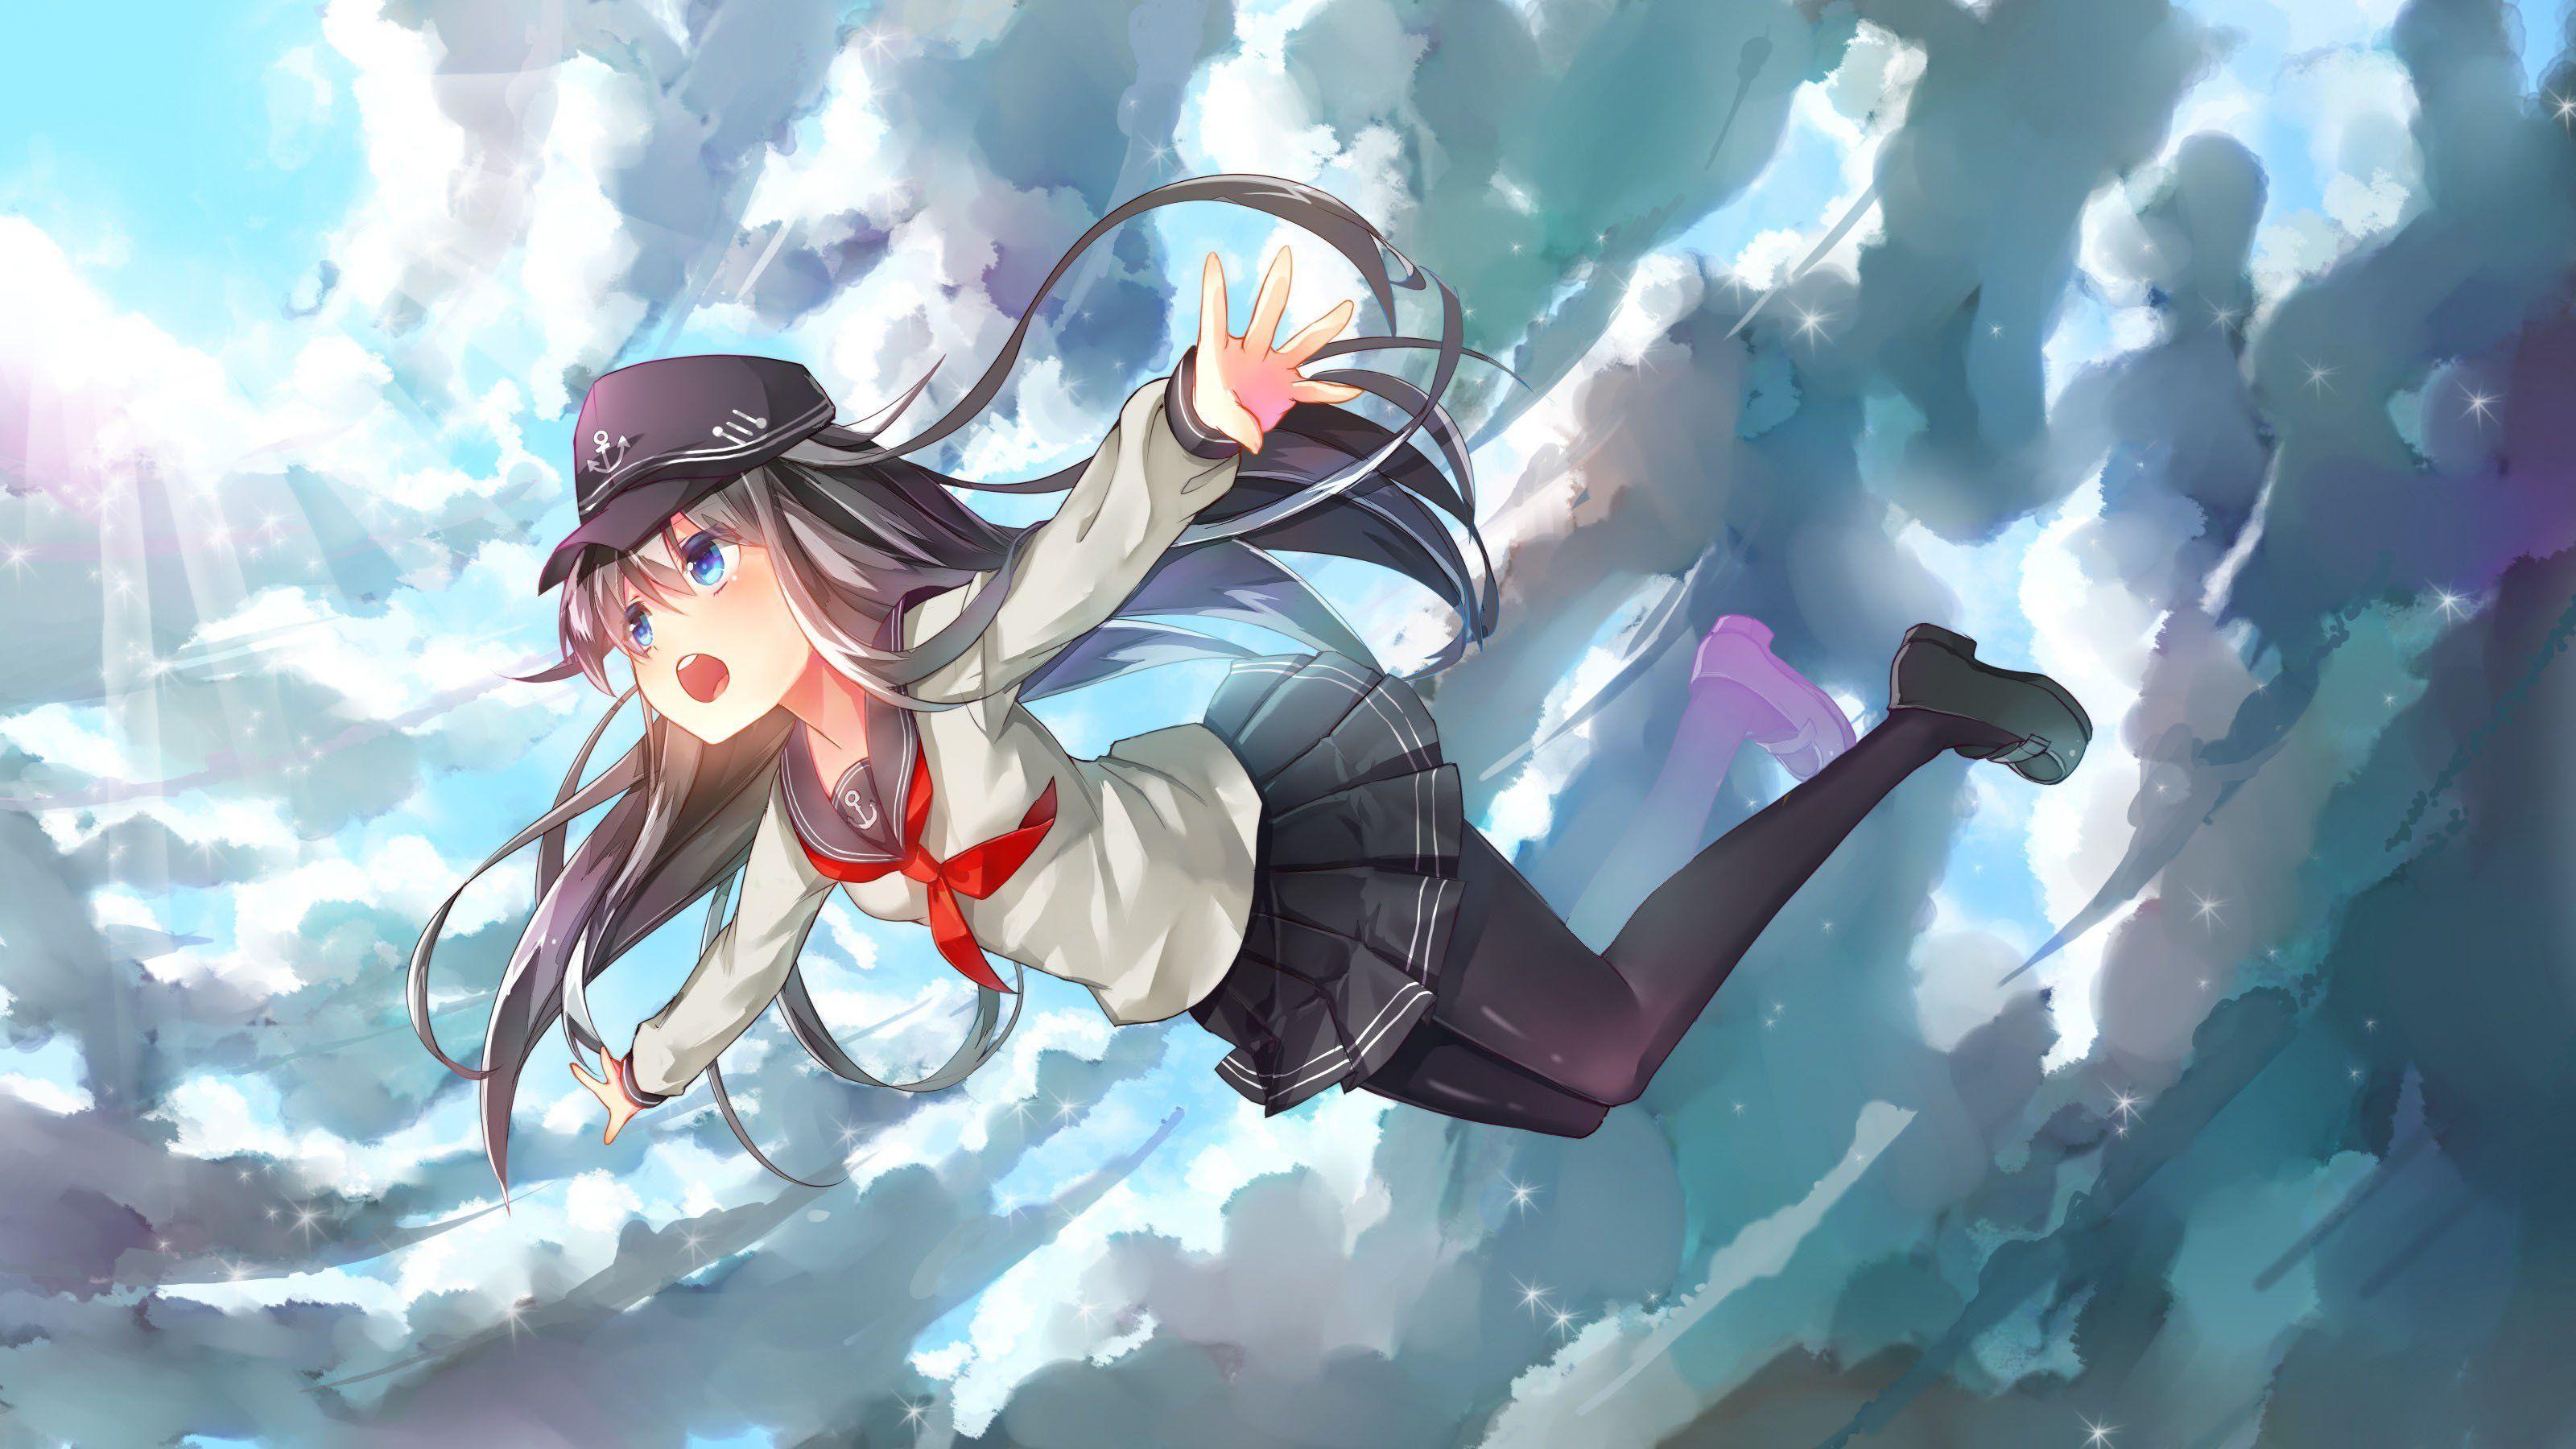 Anime Flying Wallpapers Top Free Anime Flying Backgrounds | The Best ...